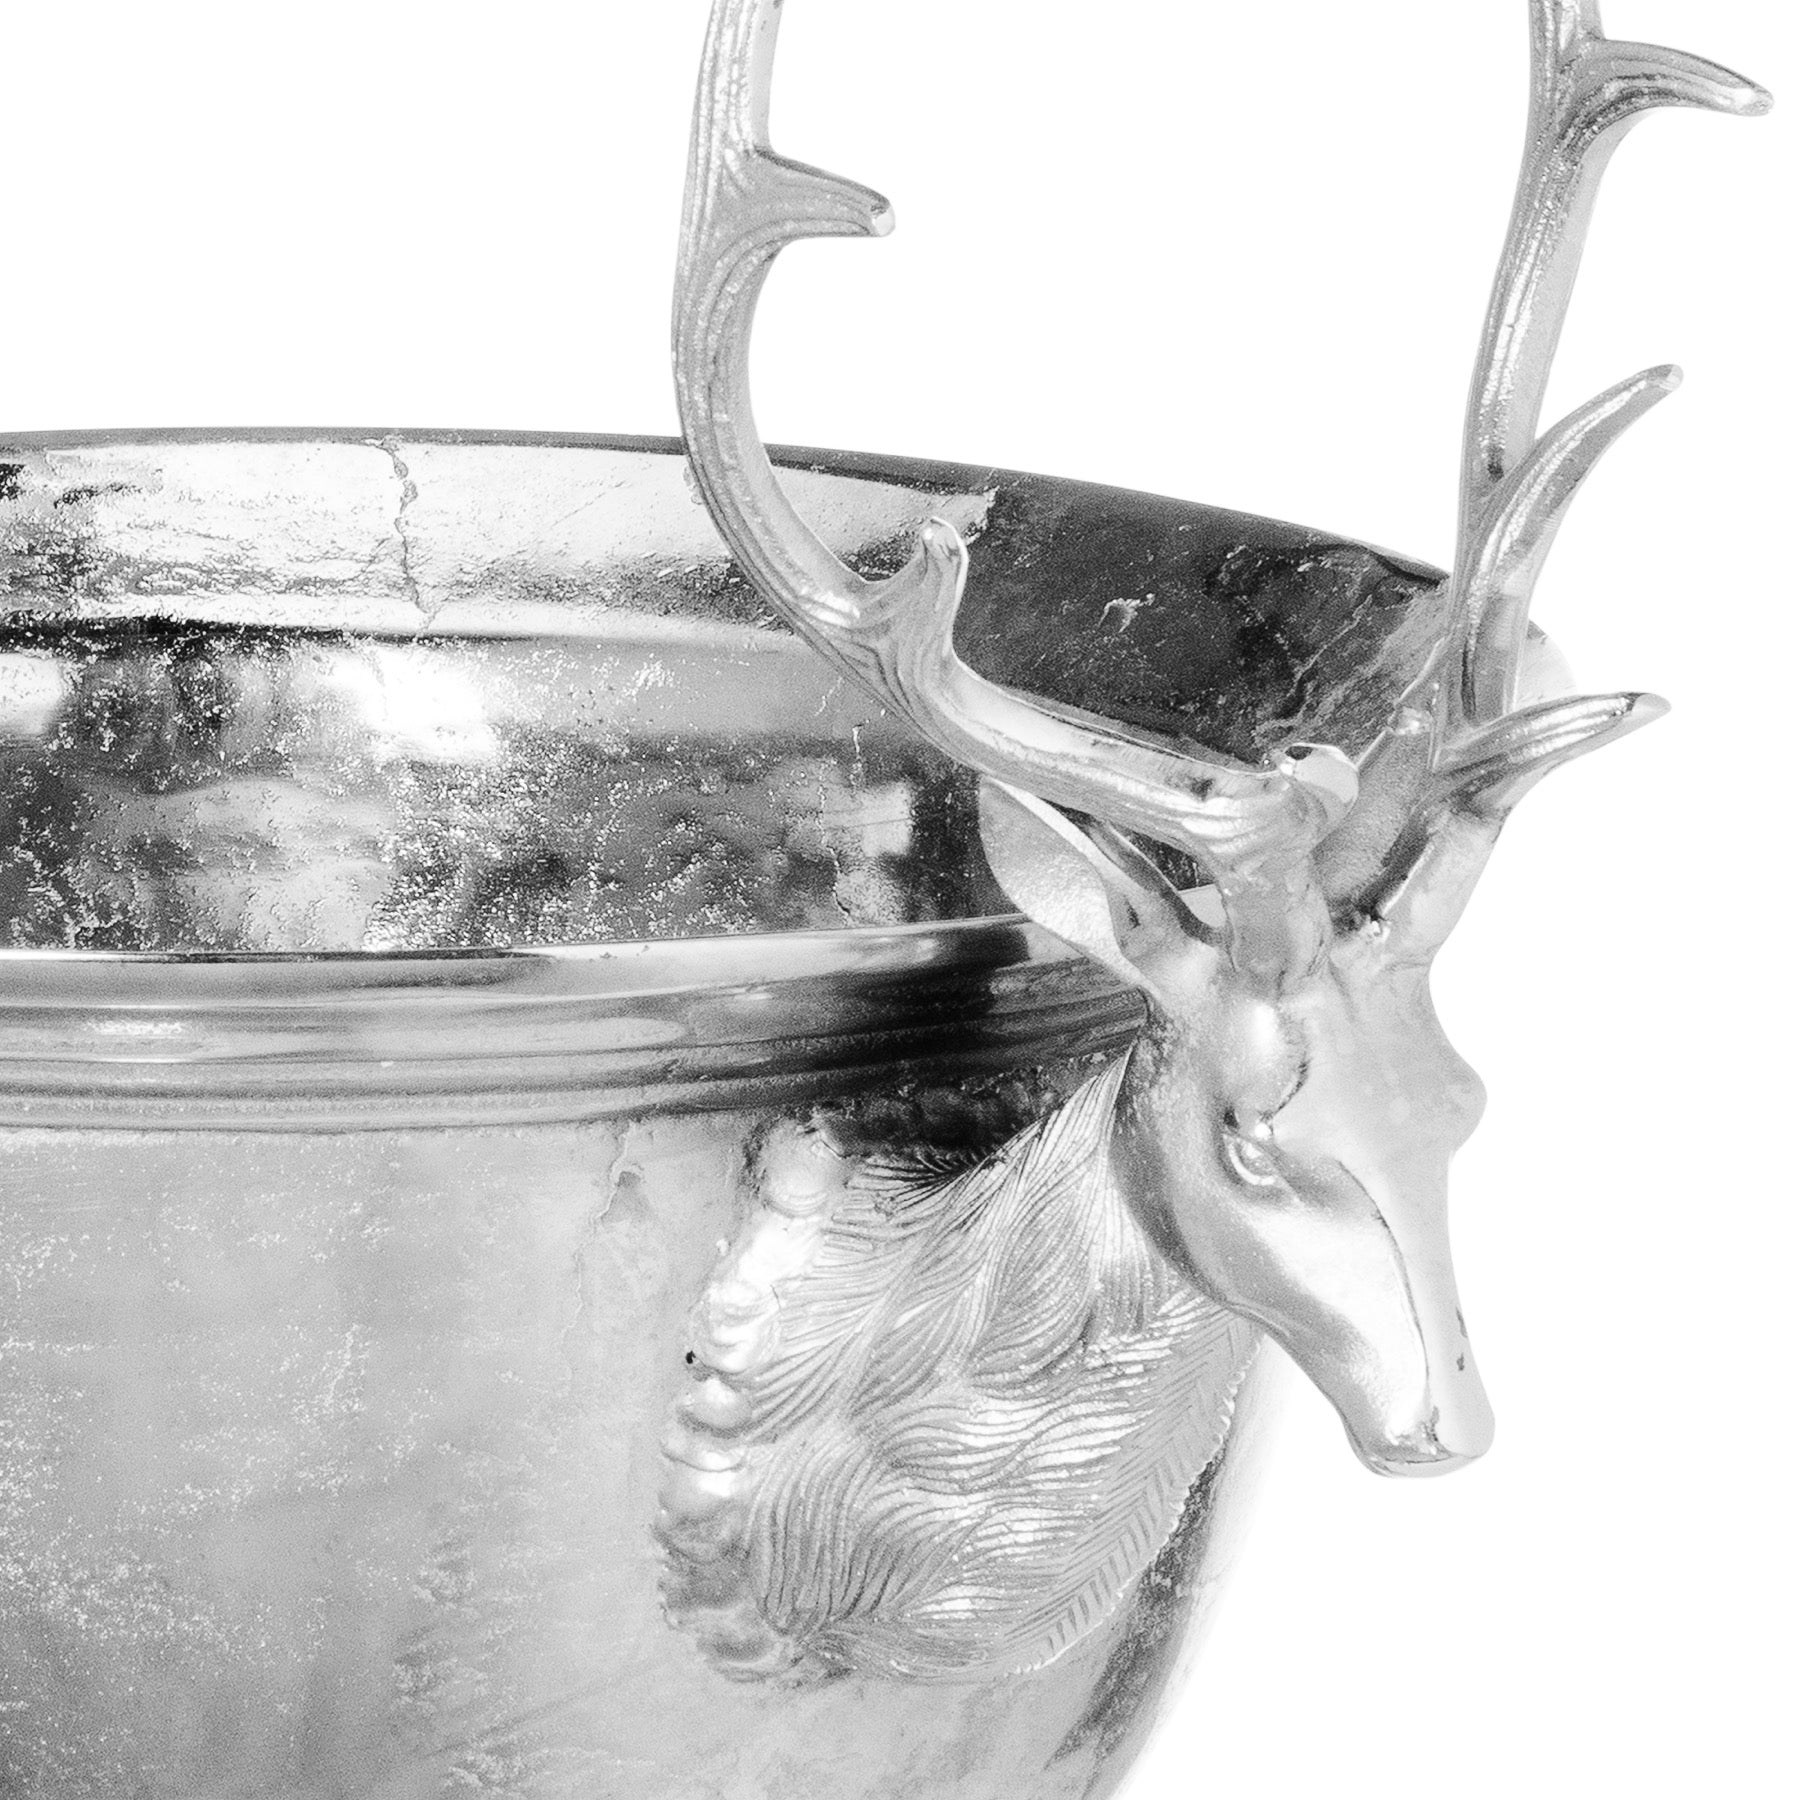 Large Aluminium Stag Champagne Cooler on Stand